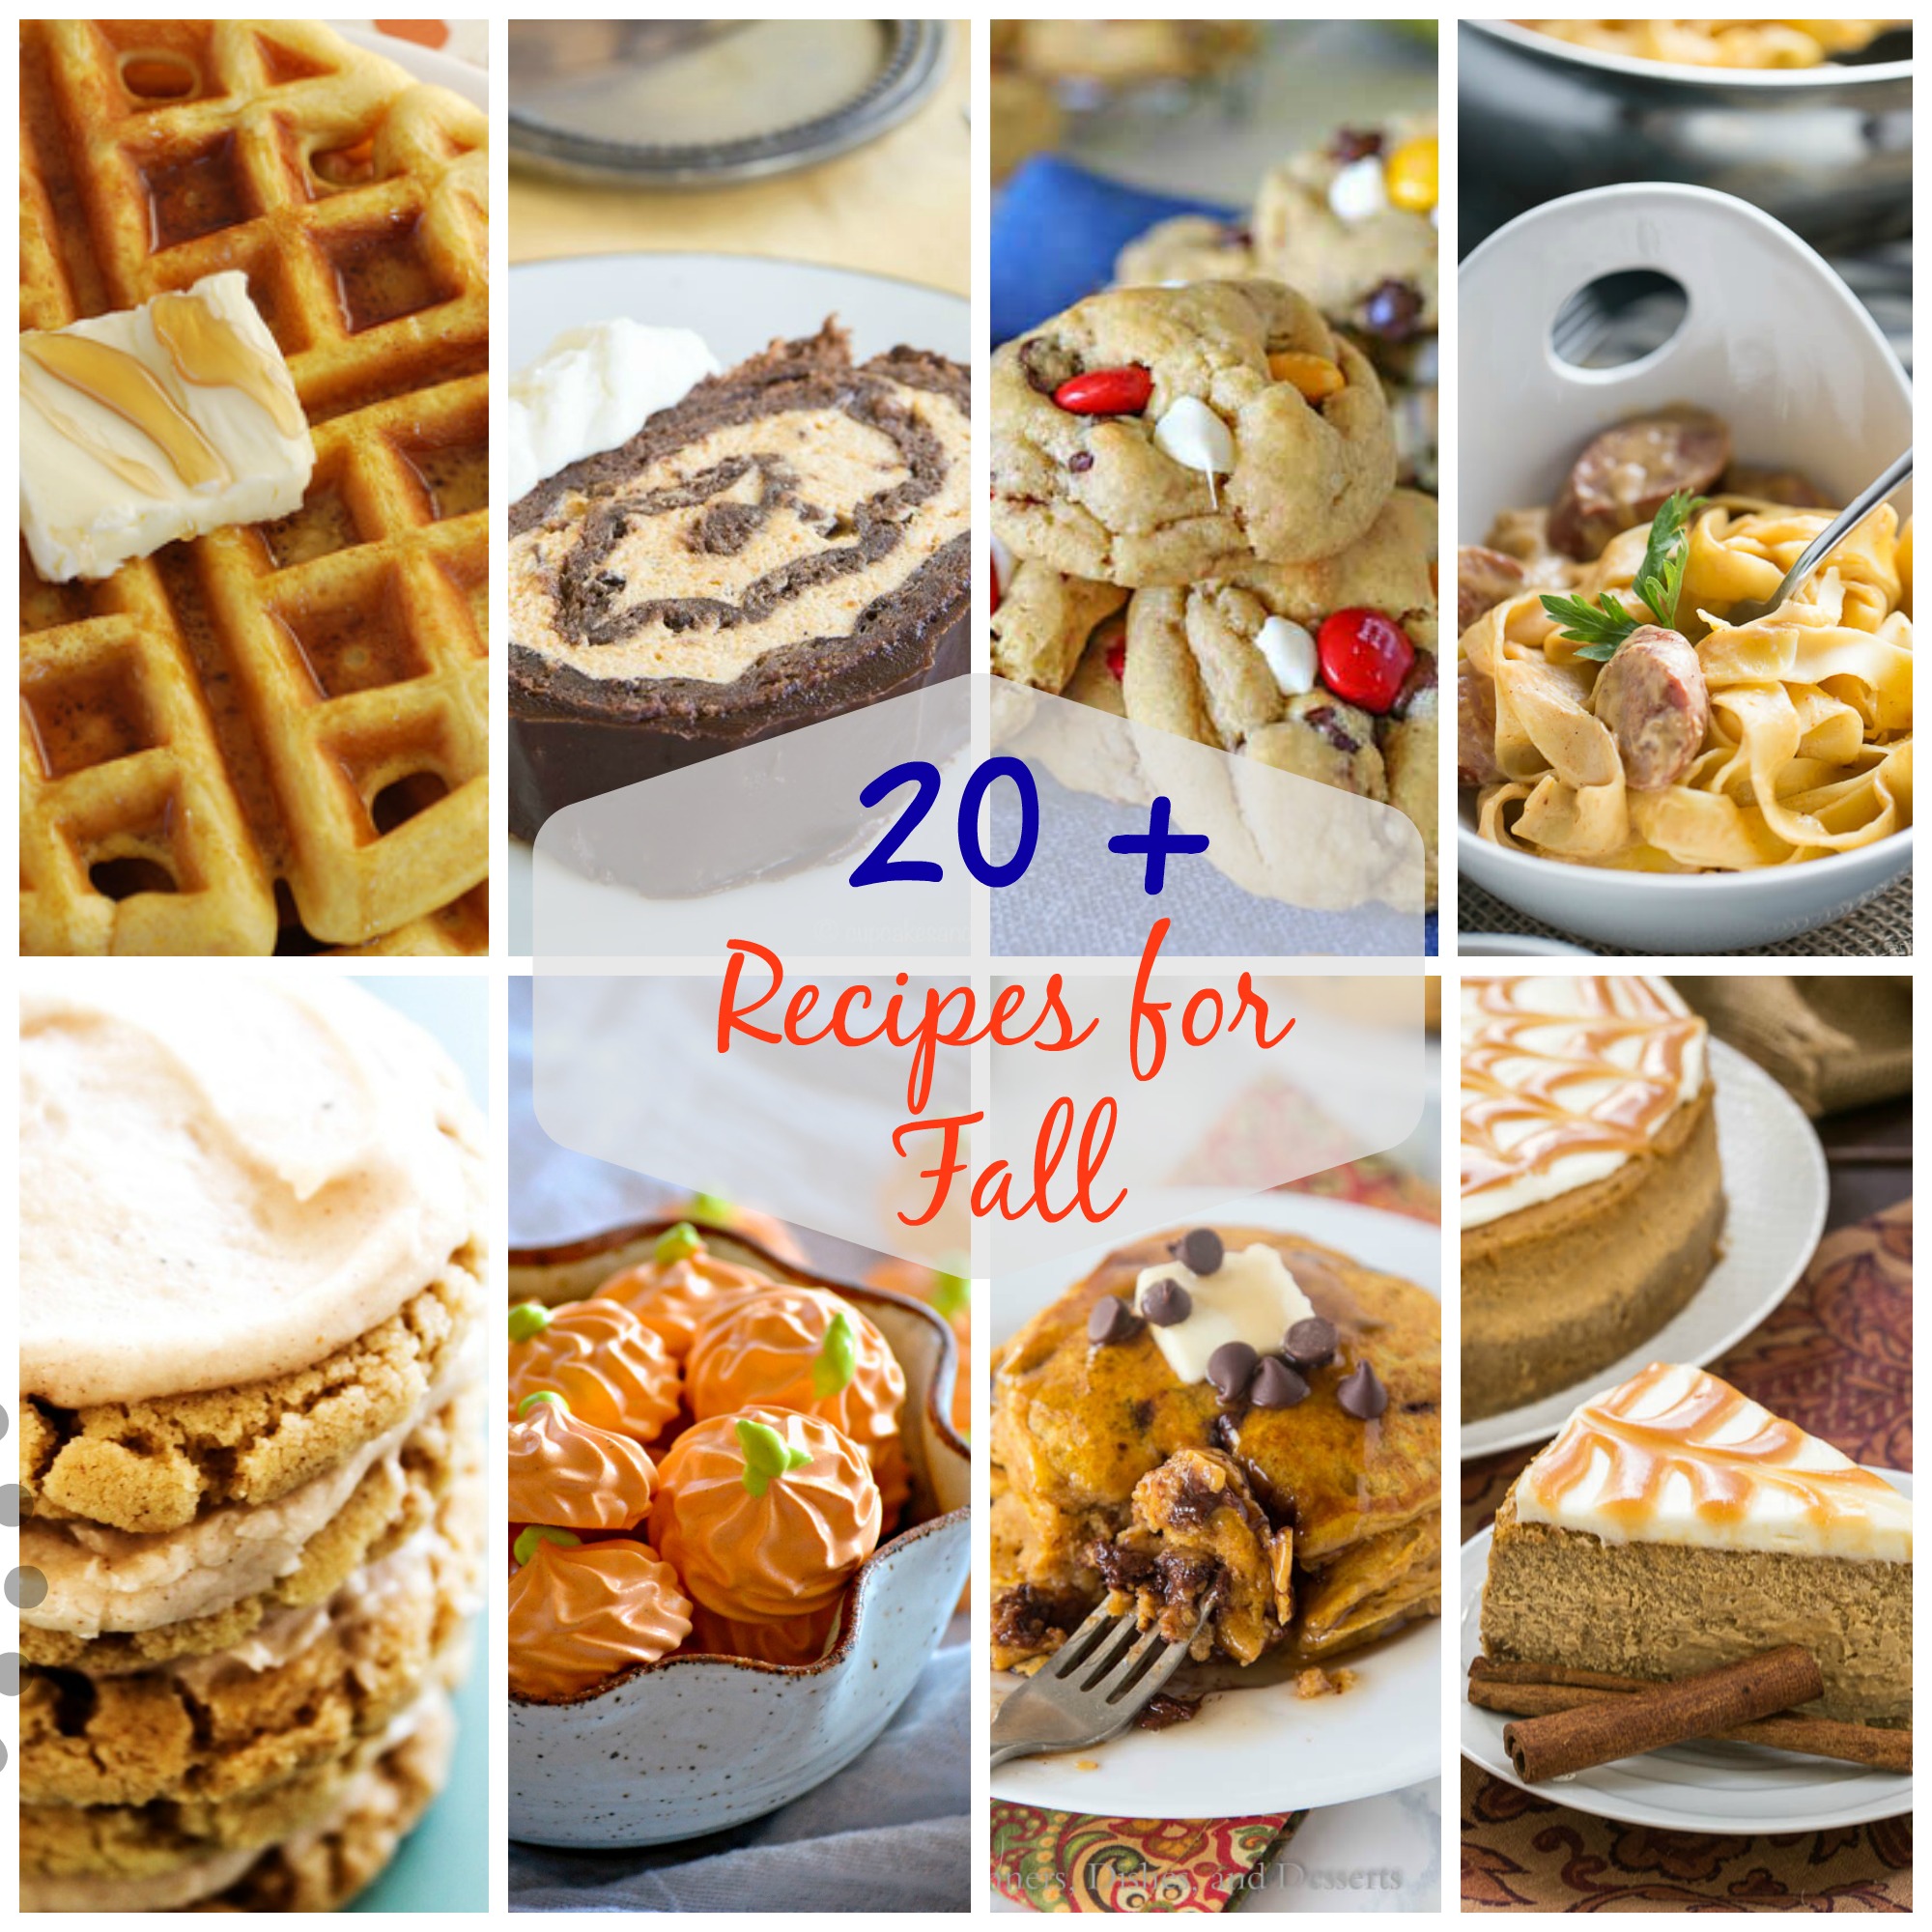 From waffles and pasta dishes to cakes and cookies, here are 20+ super amazing fall recipes for you to cozy up to! Add them to your menu plans ASAP!